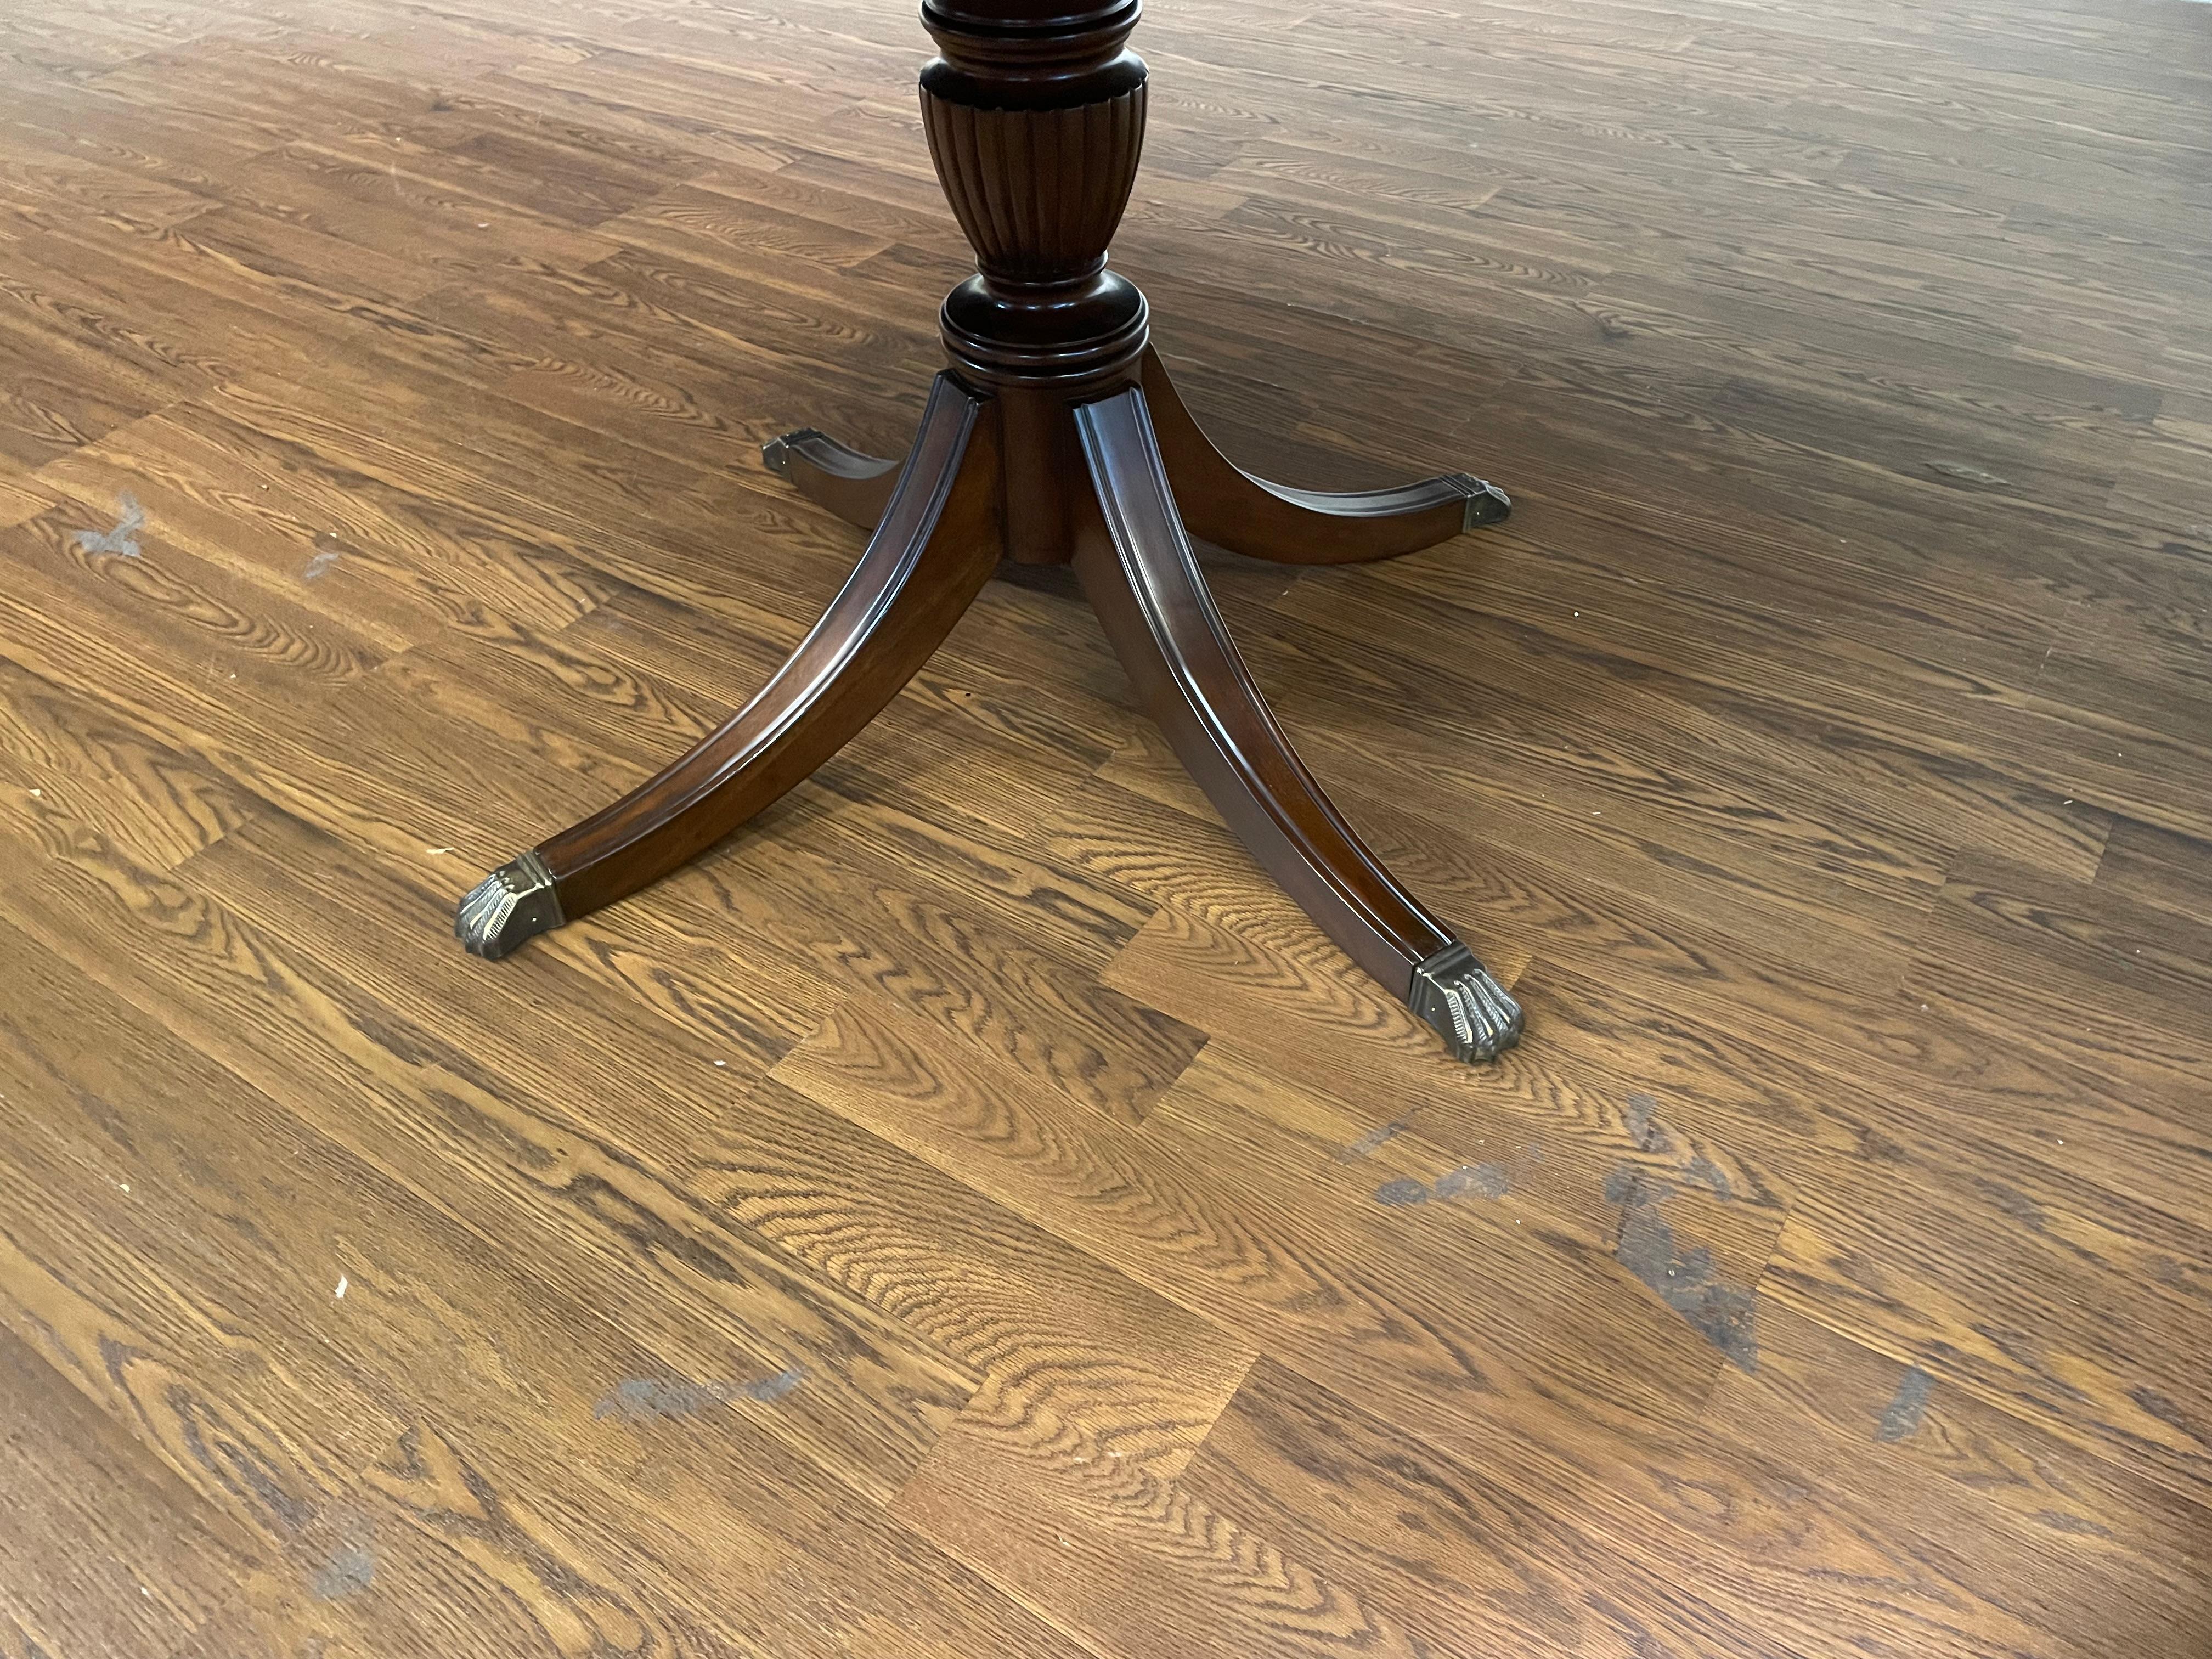 54 Inch Round Mahogany Dining Table by Leighton Hall - Showroom Sample For Sale 1